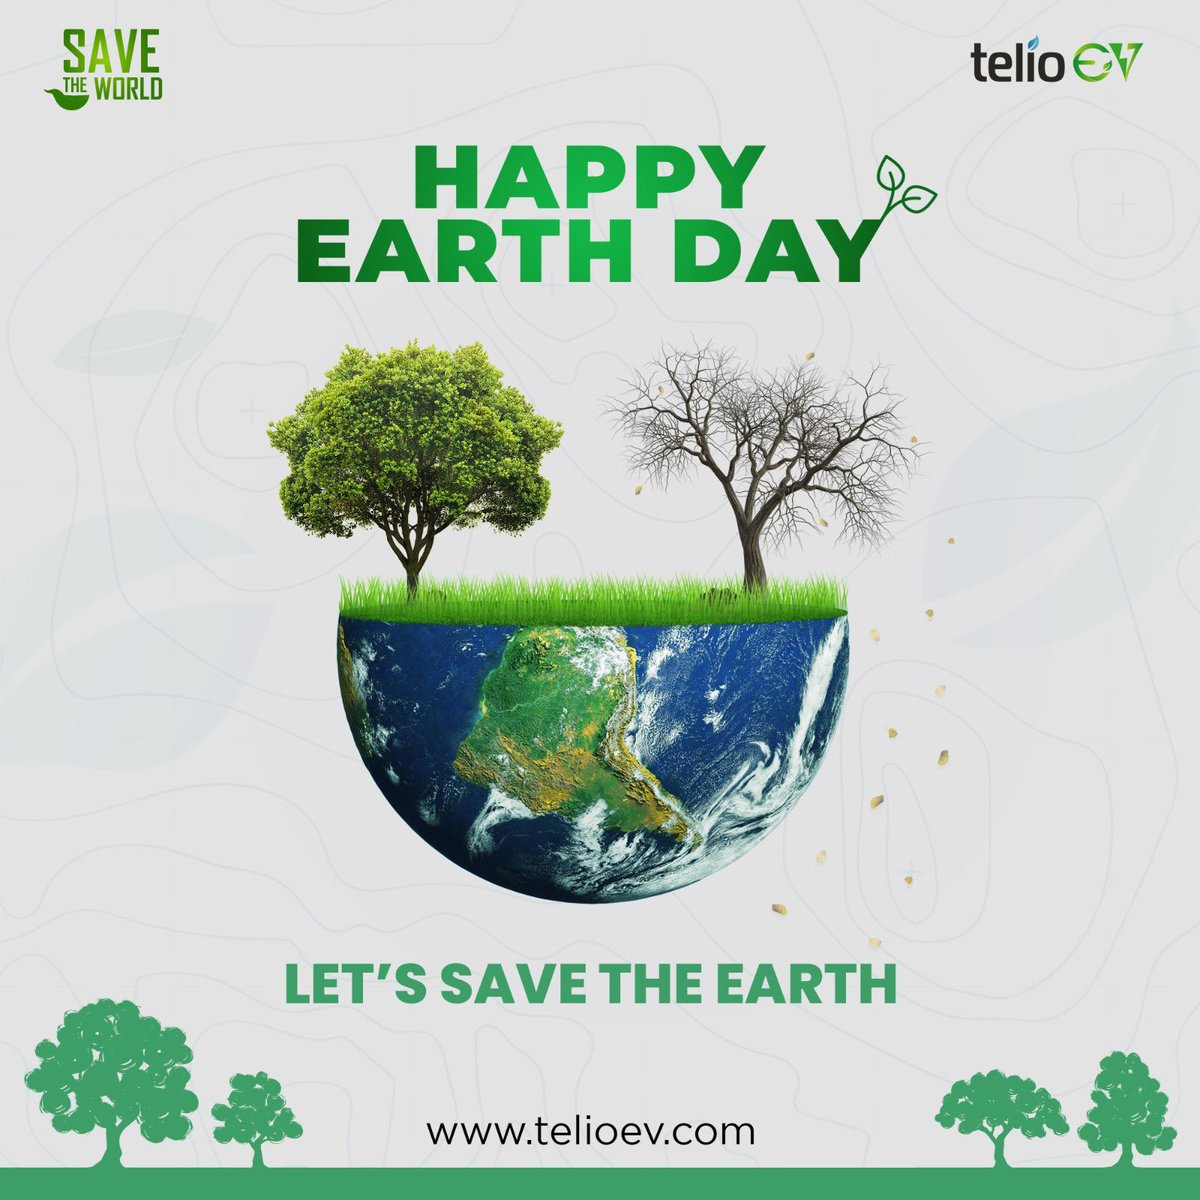 Happy Earth Day! Let's honor our planet by reducing waste, conserving energy, and protecting our natural resources. 

Together, we can make a difference for a healthier and sustainable future.

#EarthDay #treePlantation #future #Sustainability #telioev #GoGreen